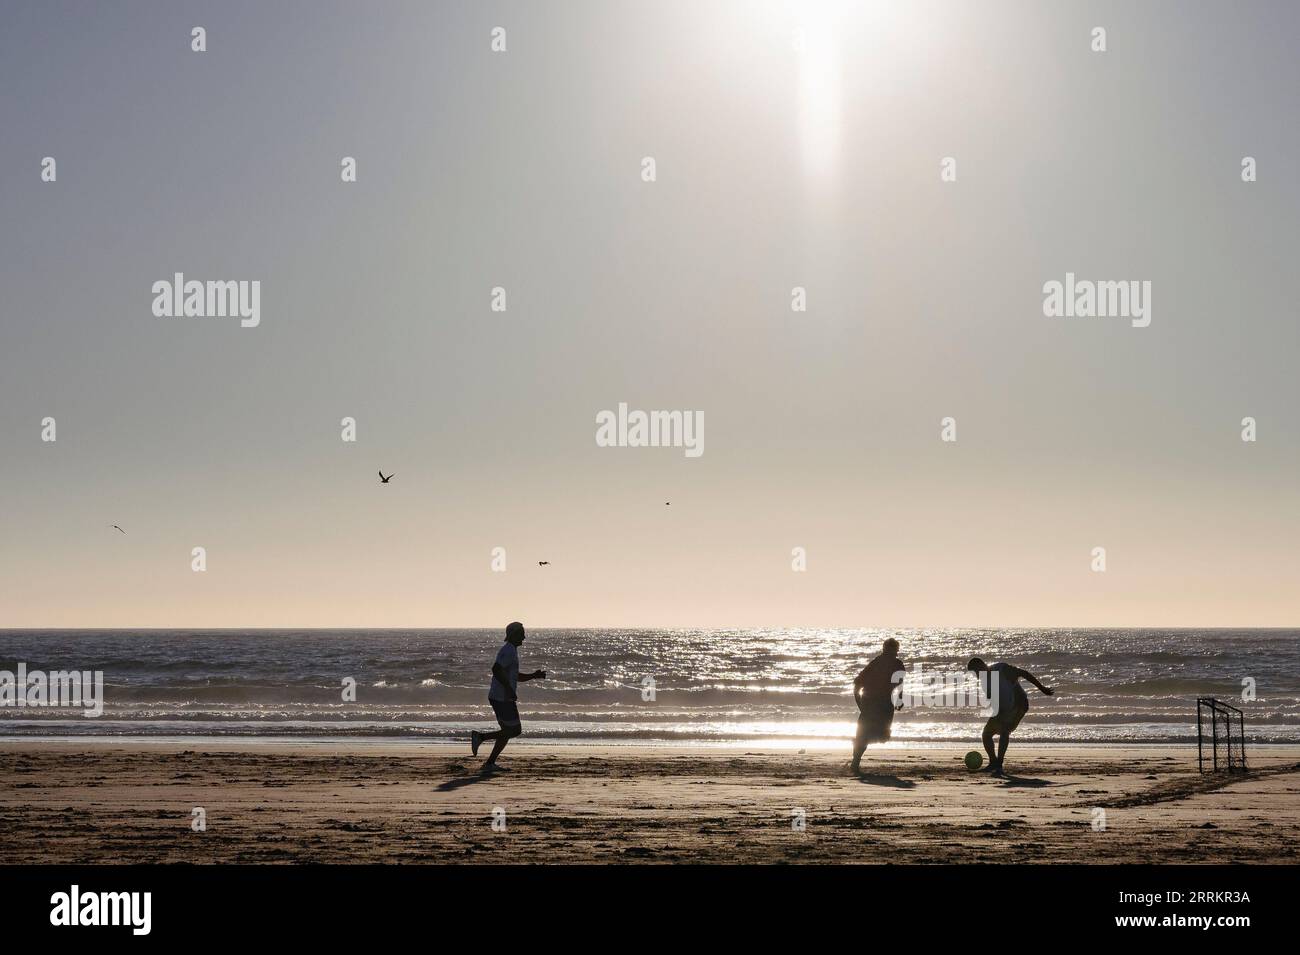 Soccer player on sandy beach by the sea Stock Photo